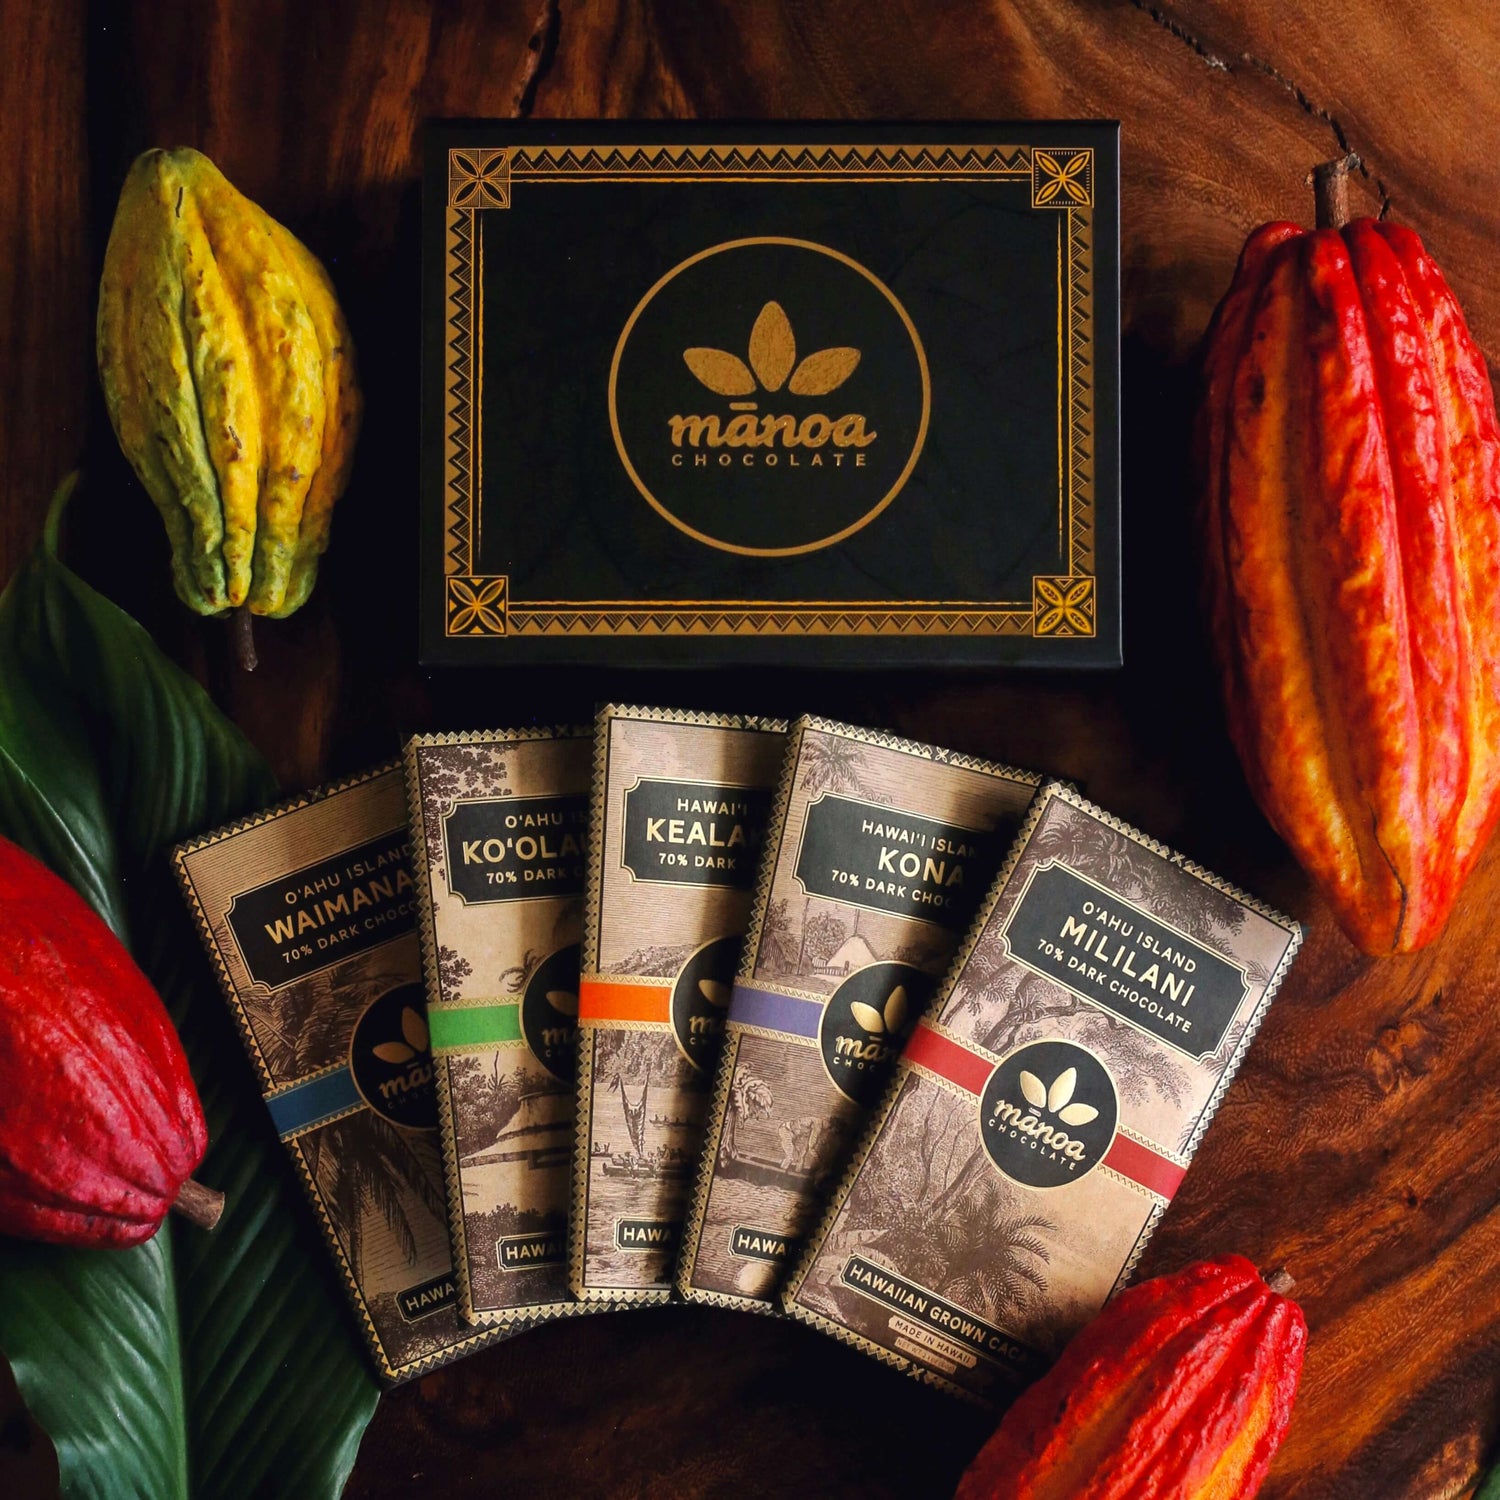 Image of five single origin chocolate bars displayed in a fan next to gift box